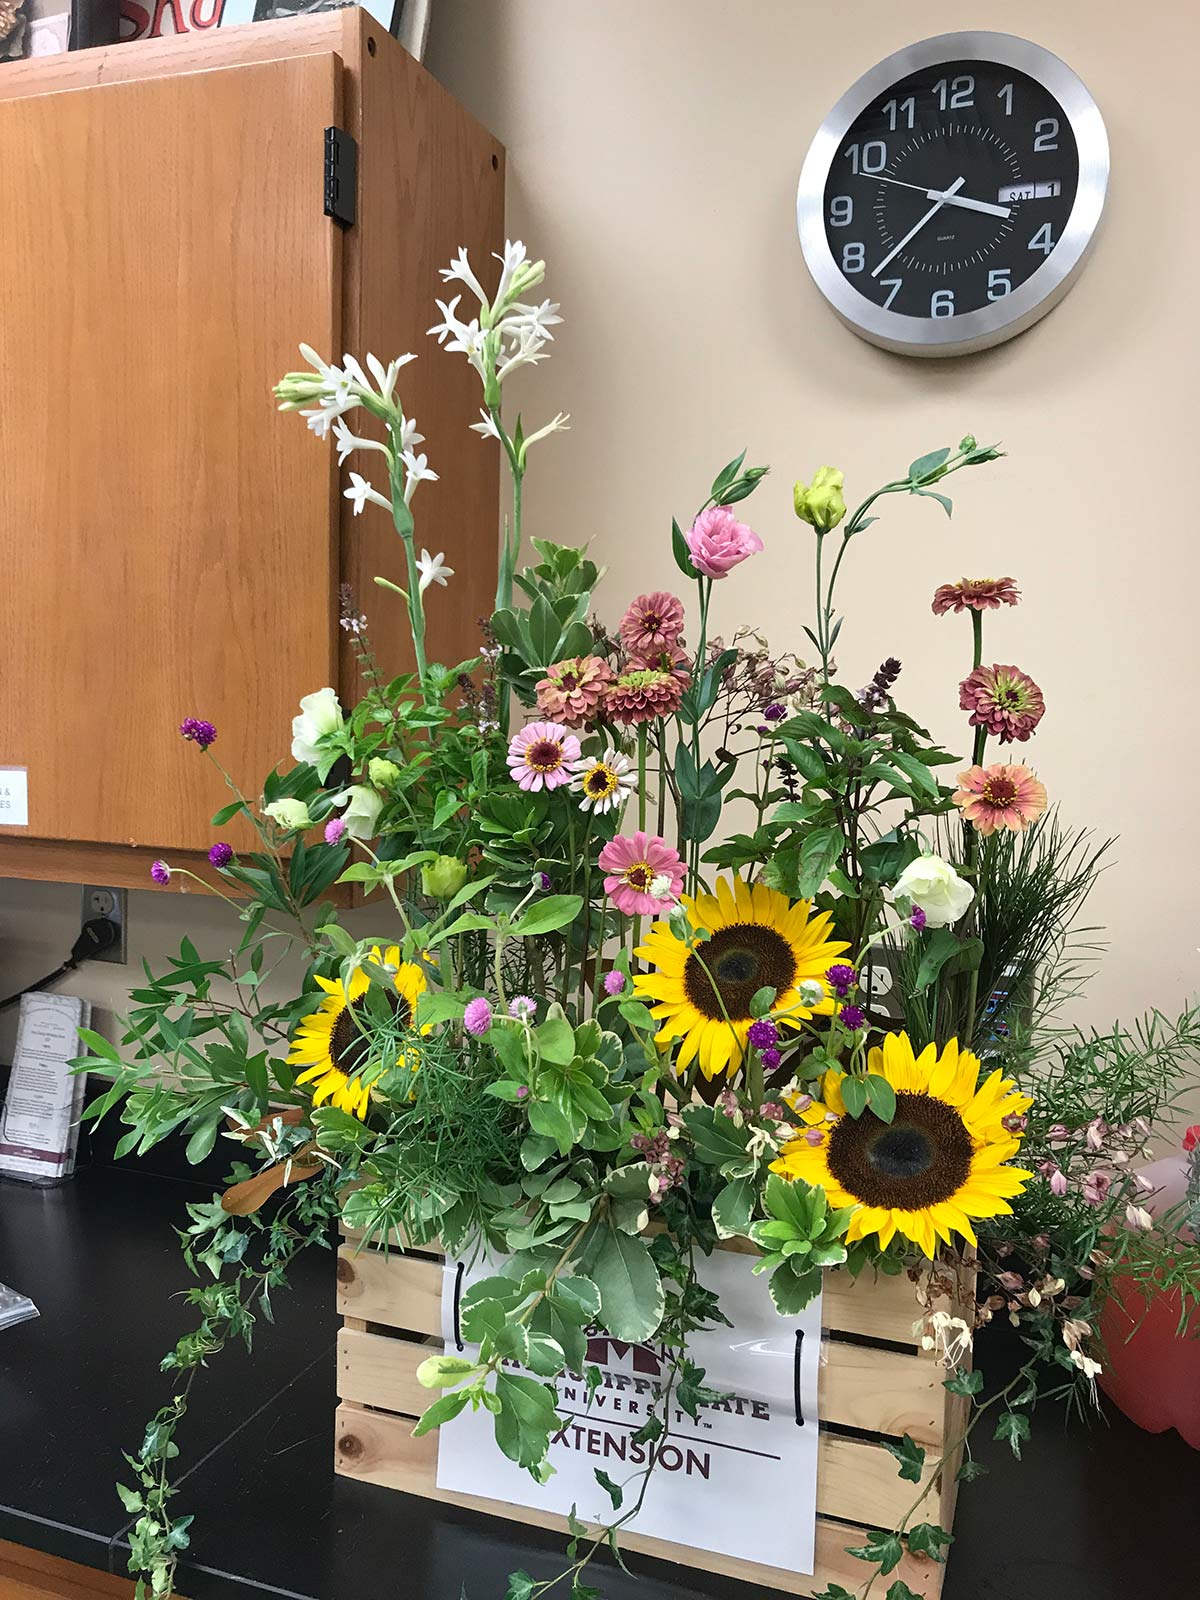 A floral arrangement with zinnias, sunflowers, and other plants.